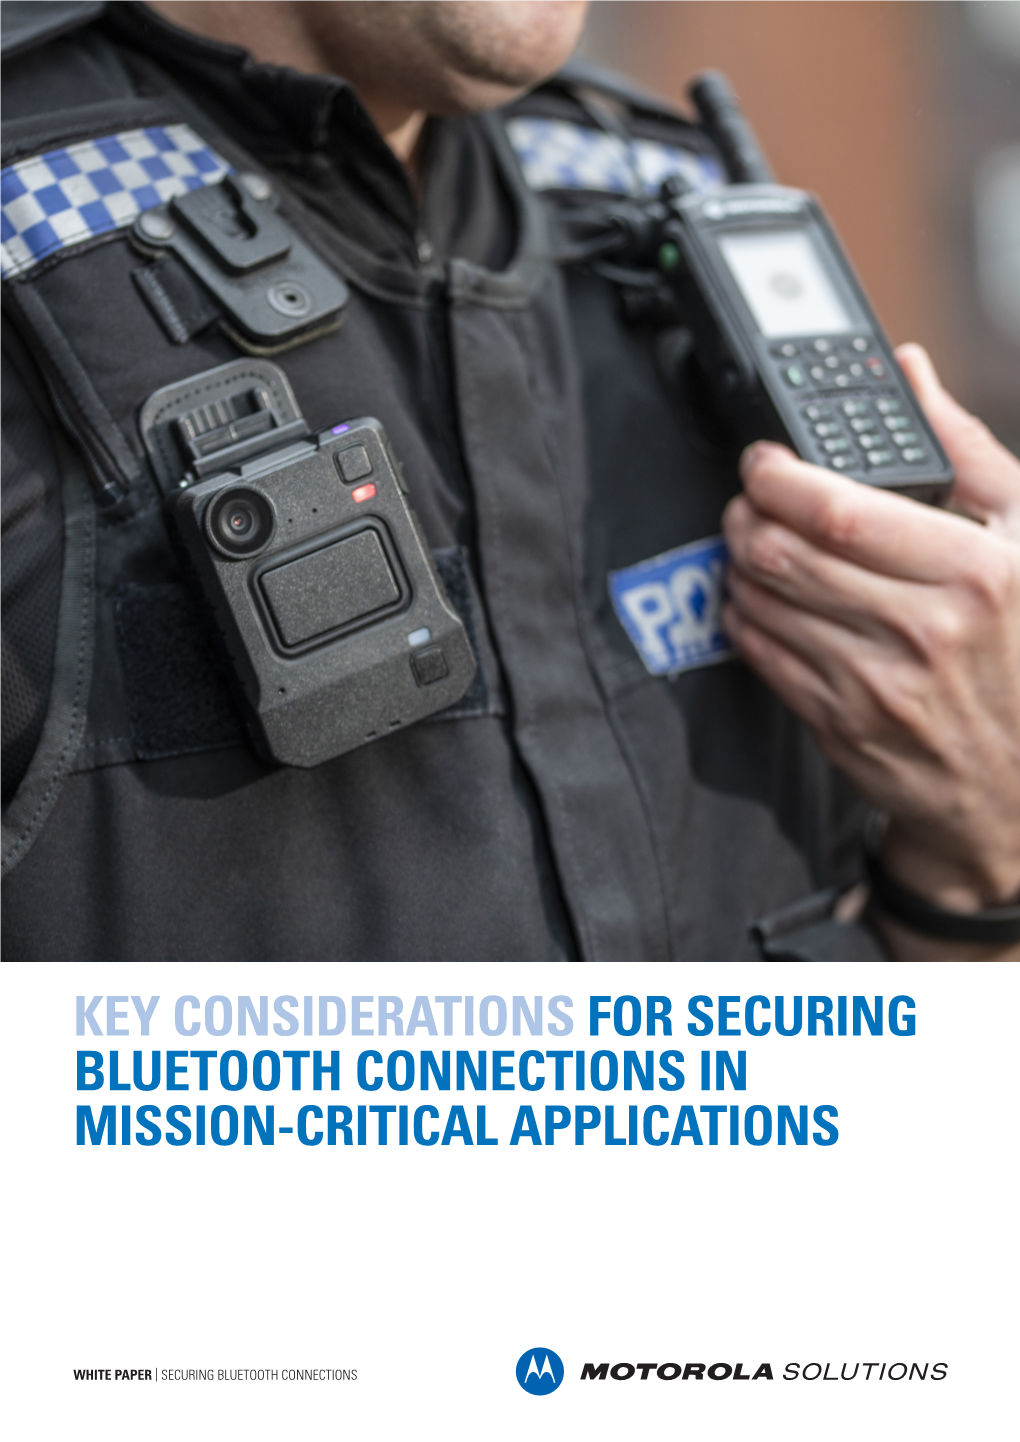 Key Considerations for Securing Bluetooth Connections in Mission-Critical Applications